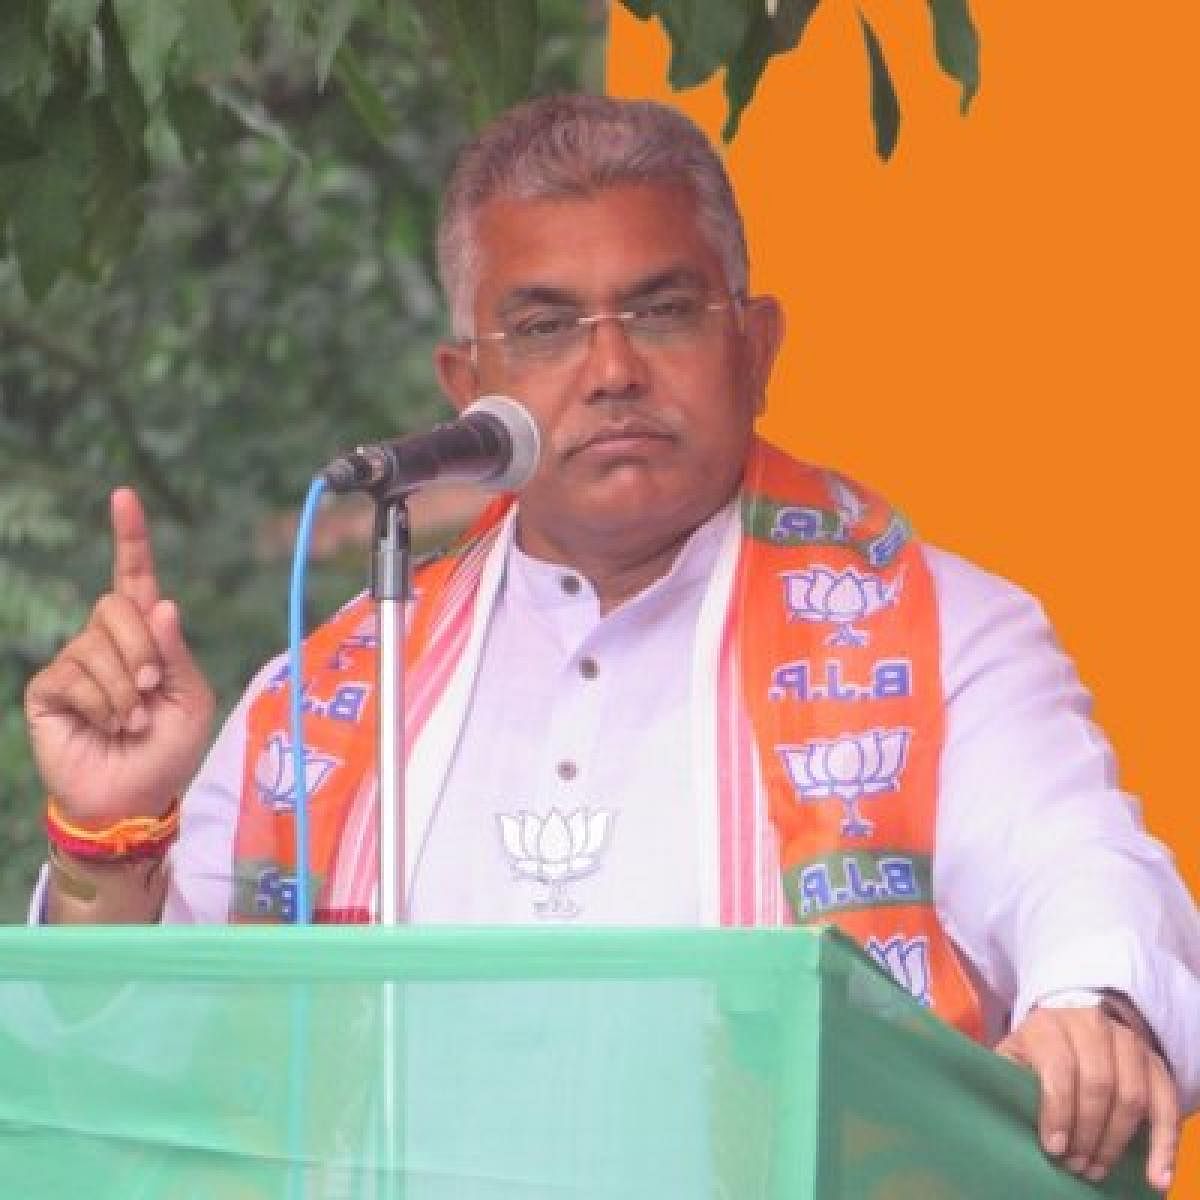 West Bengal BJP president Dilip Ghosh. (DH Photo)